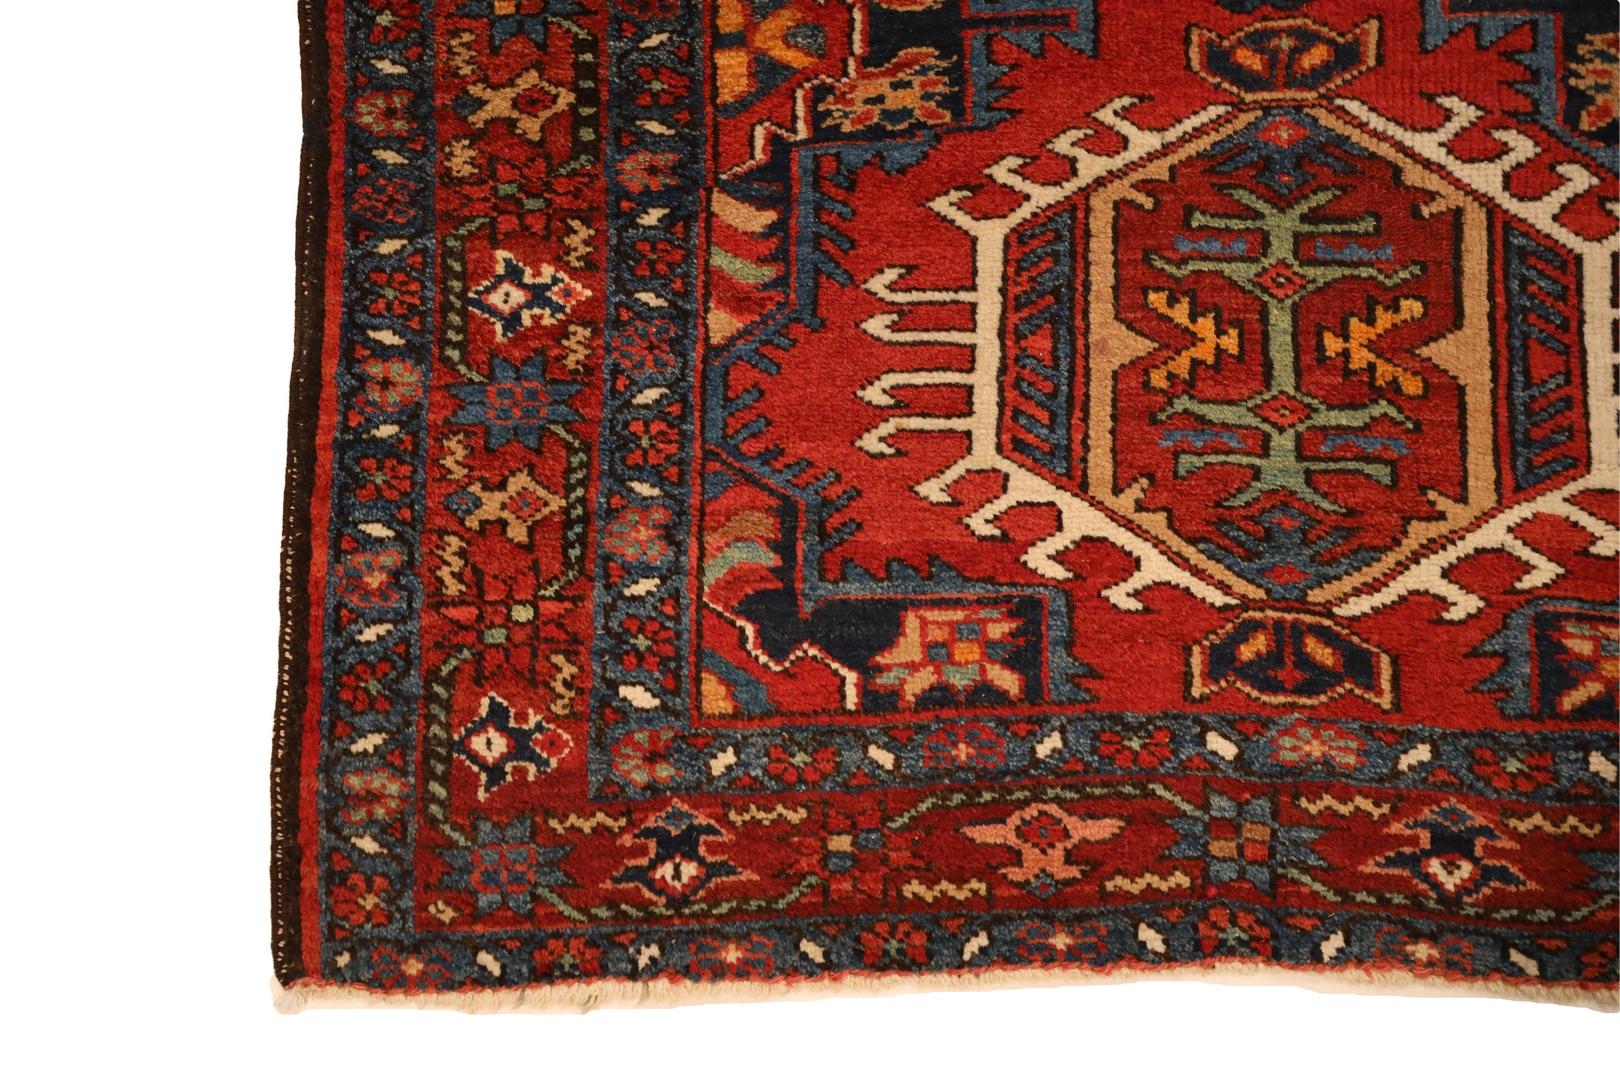 Behold the captivating elegance of a North Western Persian rug, resplendent in its magnificent design and vibrant color palette. This remarkable masterpiece features a rich red background, suffusing the entire rug with warmth and allure.

At the